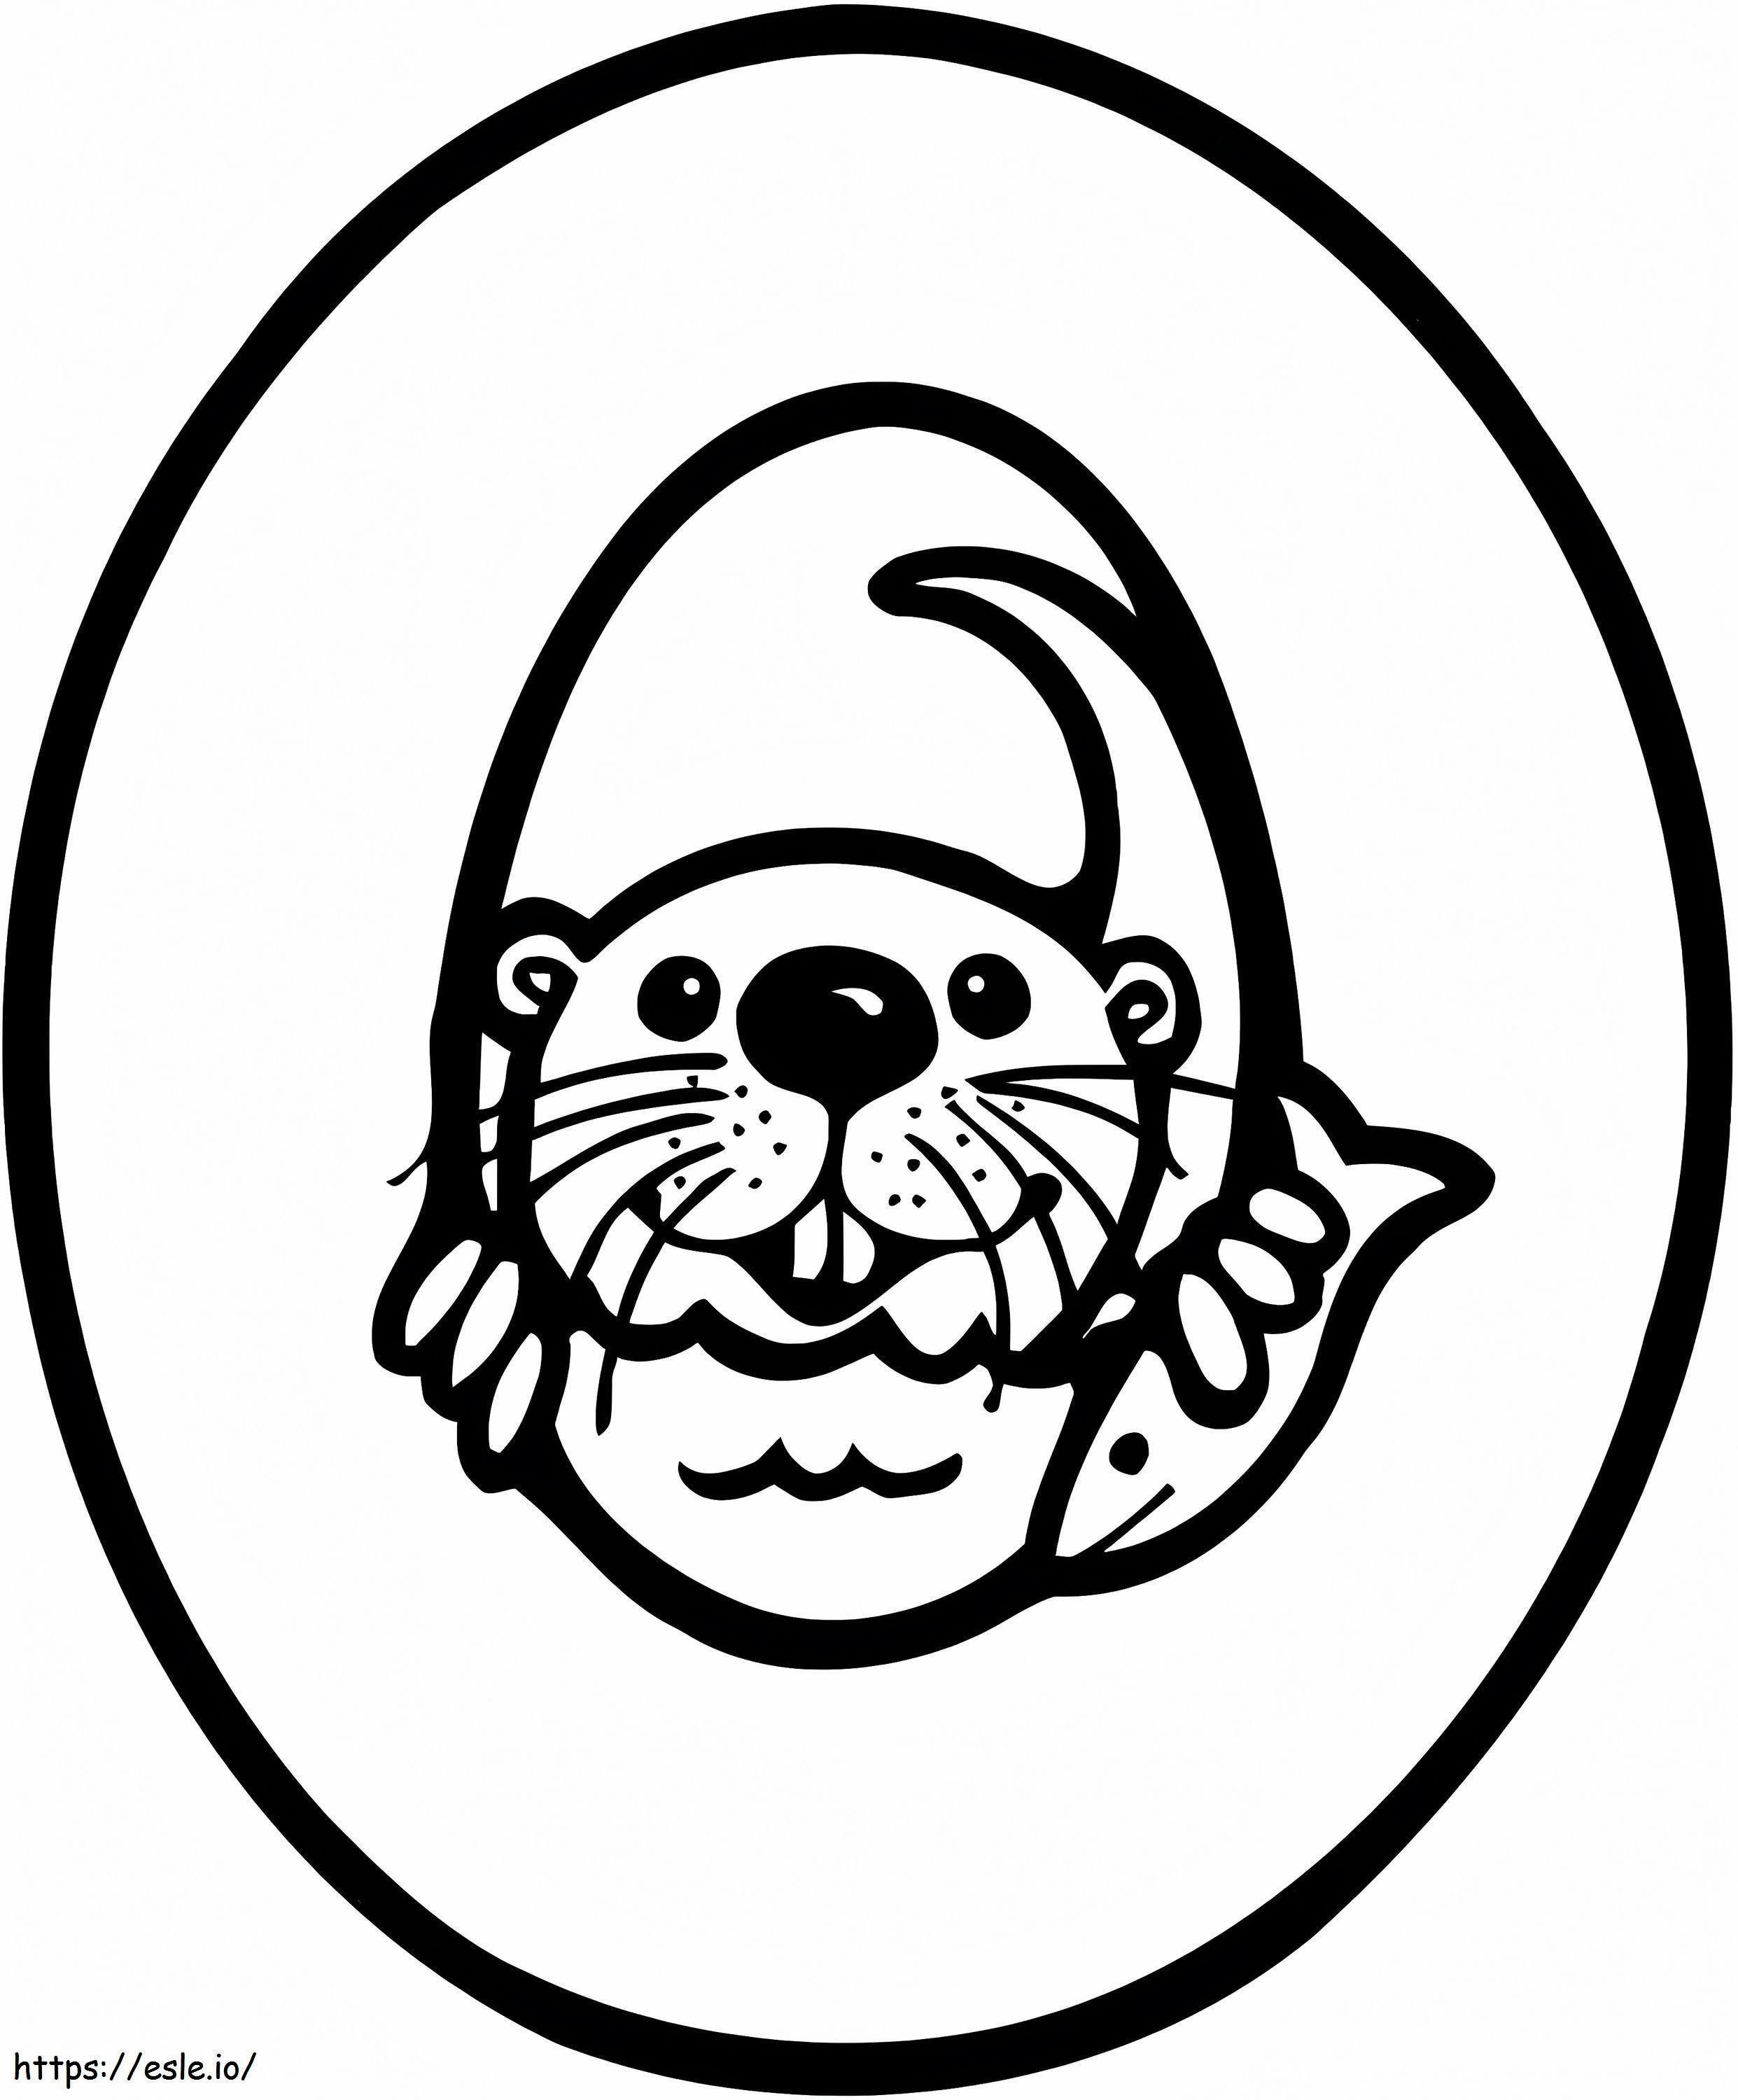 Otter Letter O coloring page